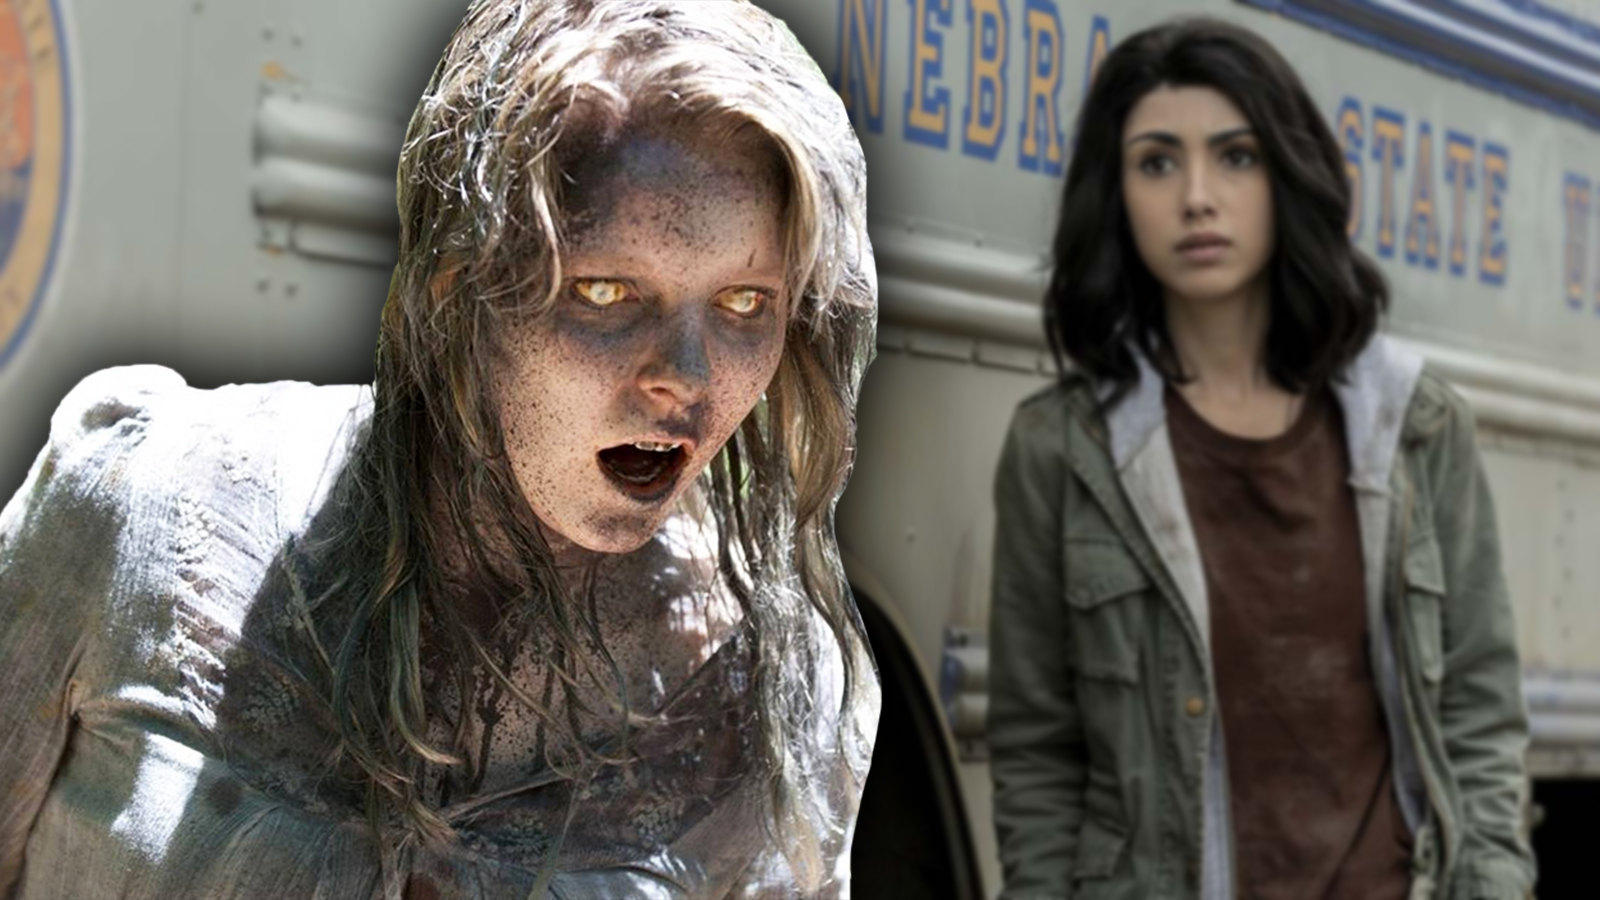 Walking Dead: World Beyond may have revealed source of zombie outbreak